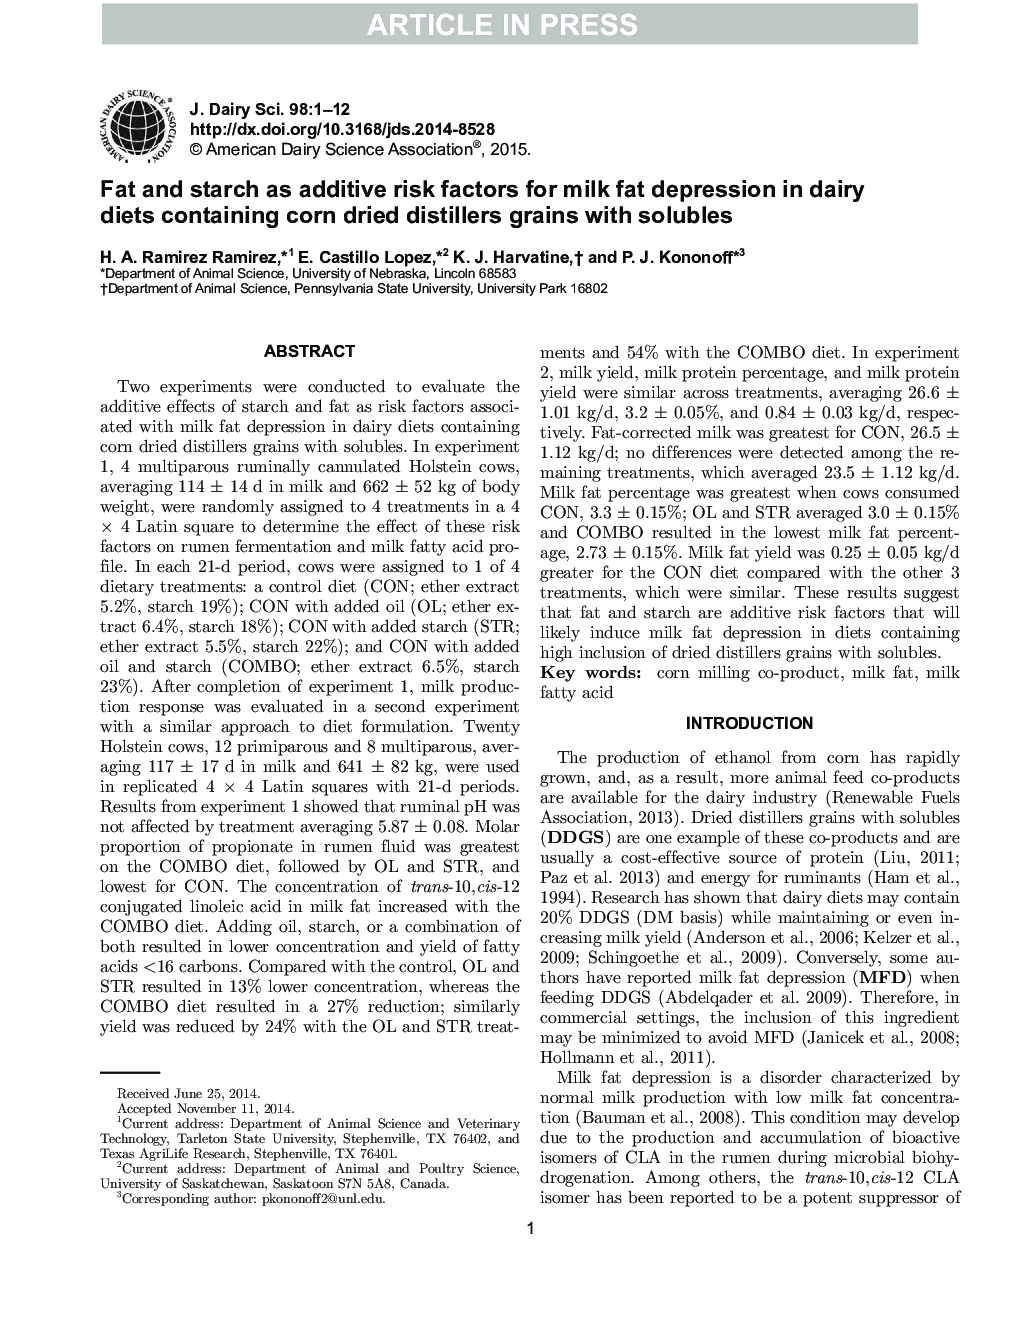 Fat and starch as additive risk factors for milk fat depression in dairy diets containing corn dried distillers grains with solubles